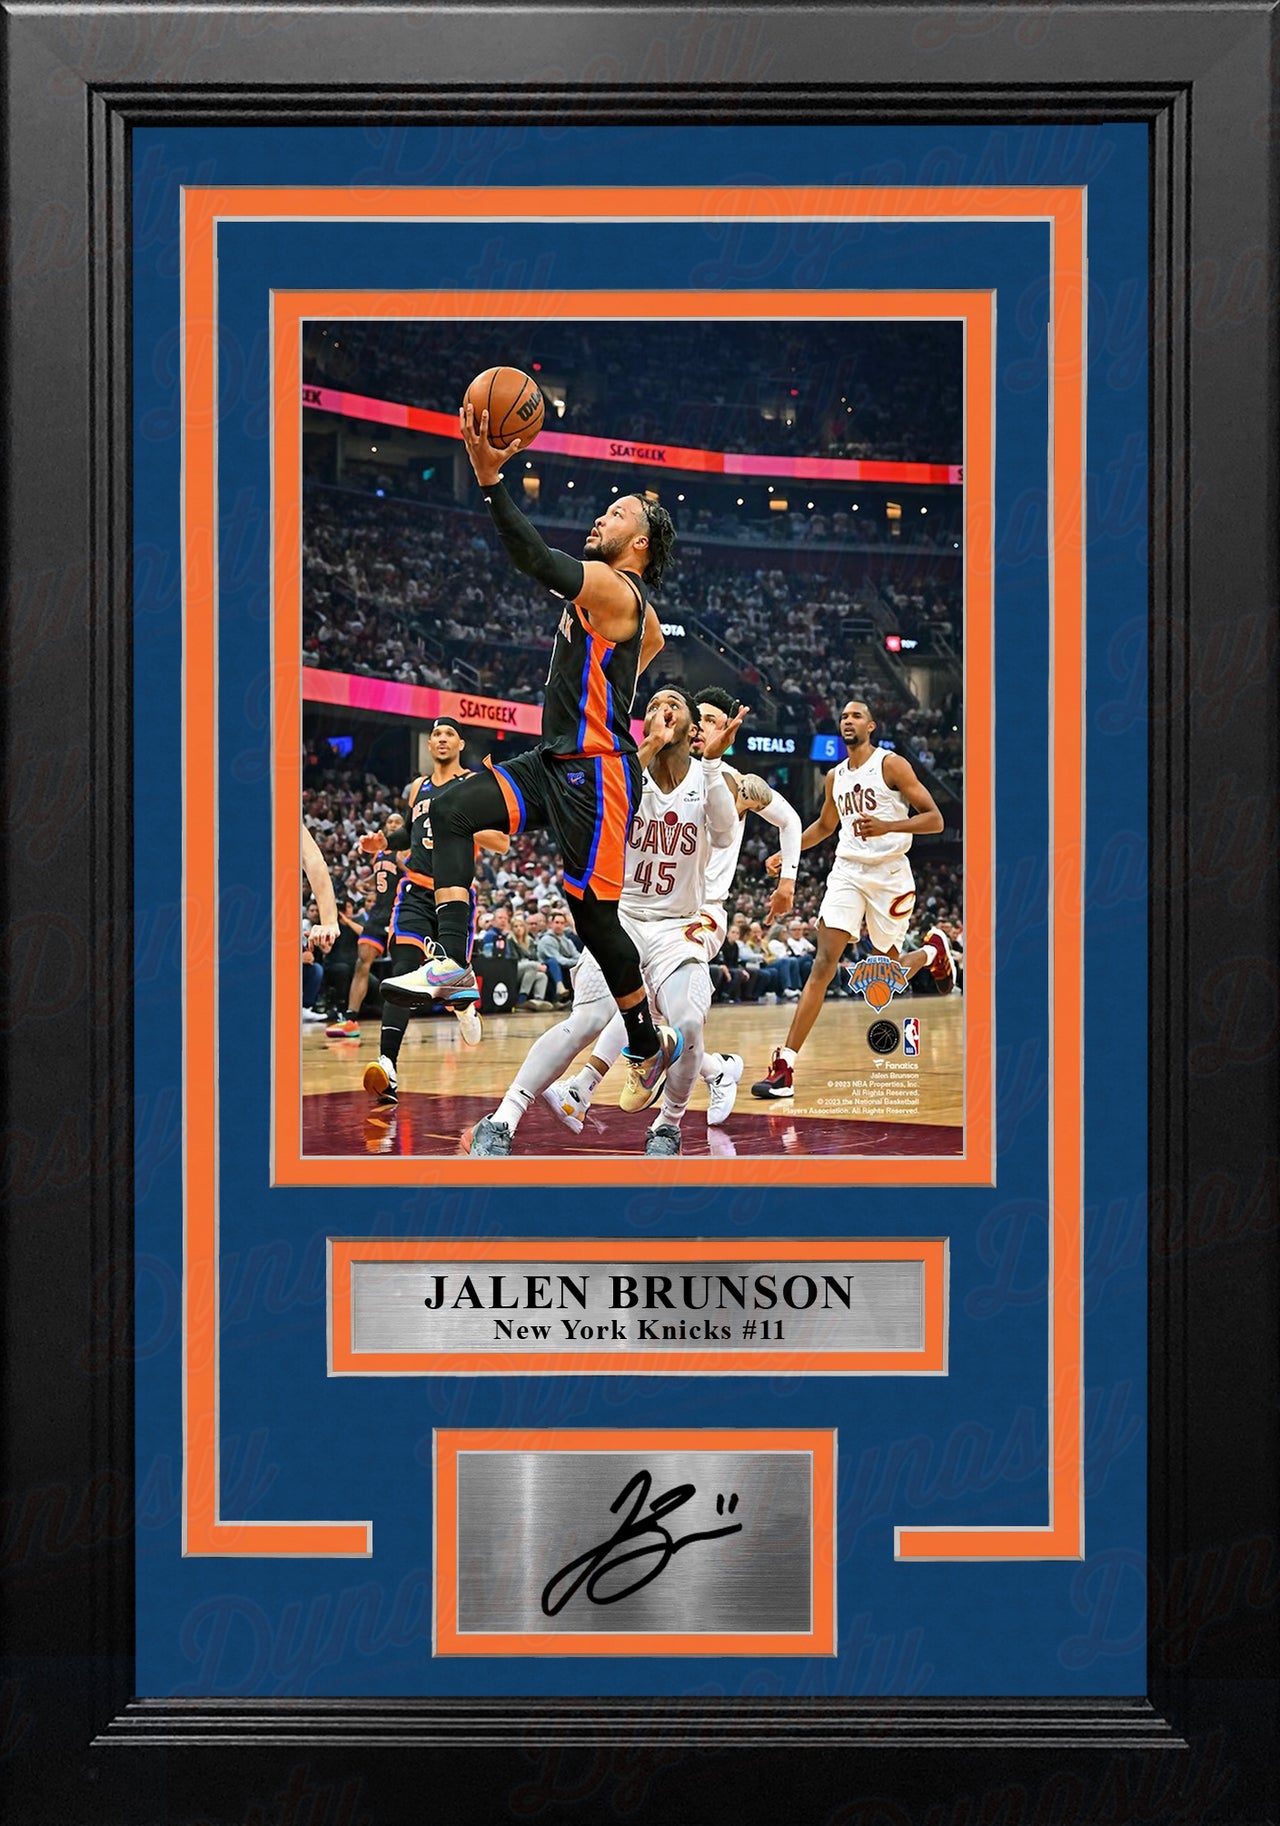 Jalen Brunson in Action New York Knicks 8" x 10" Framed Basketball Photo with Engraved Autograph